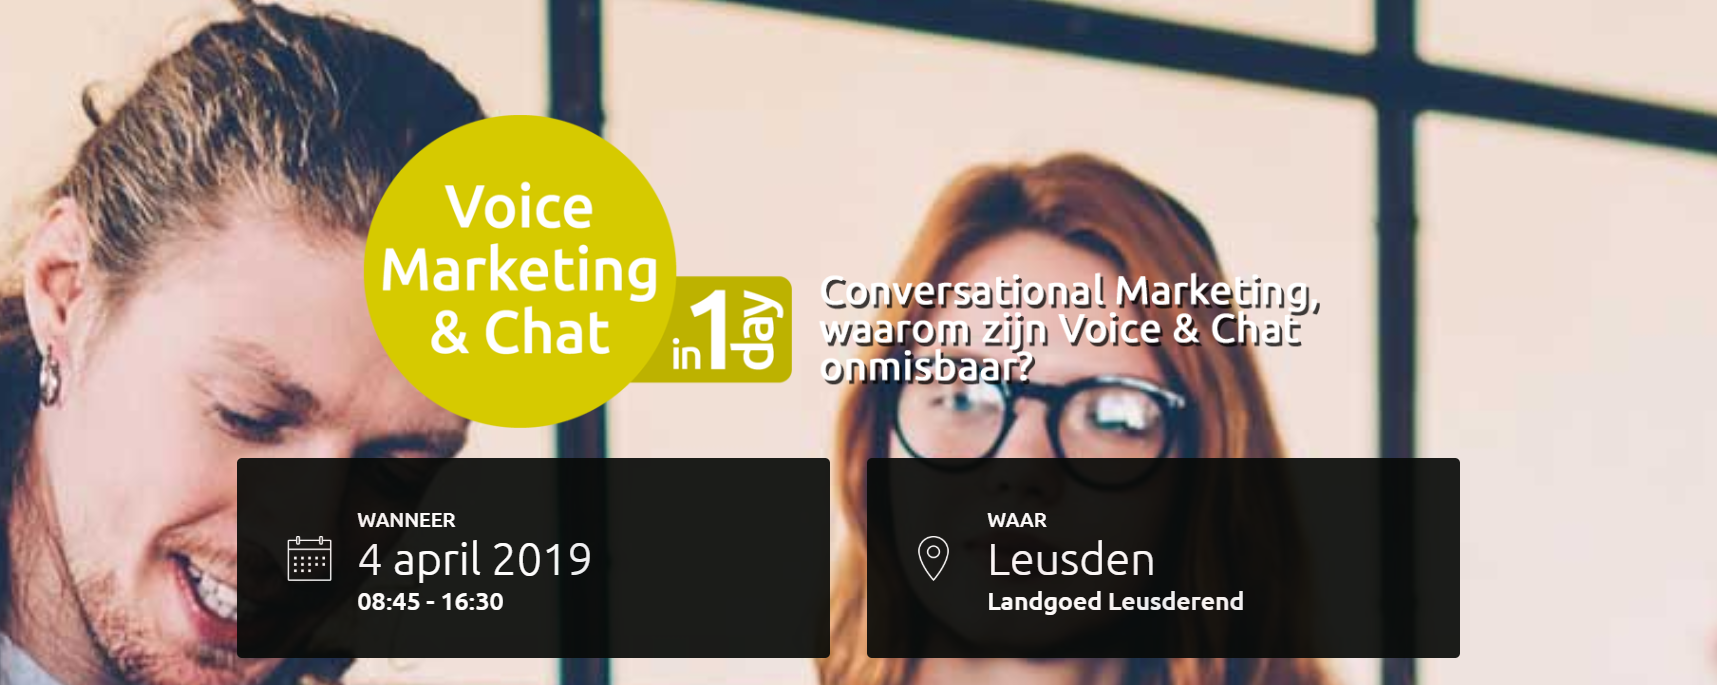 voice marketing in one day img